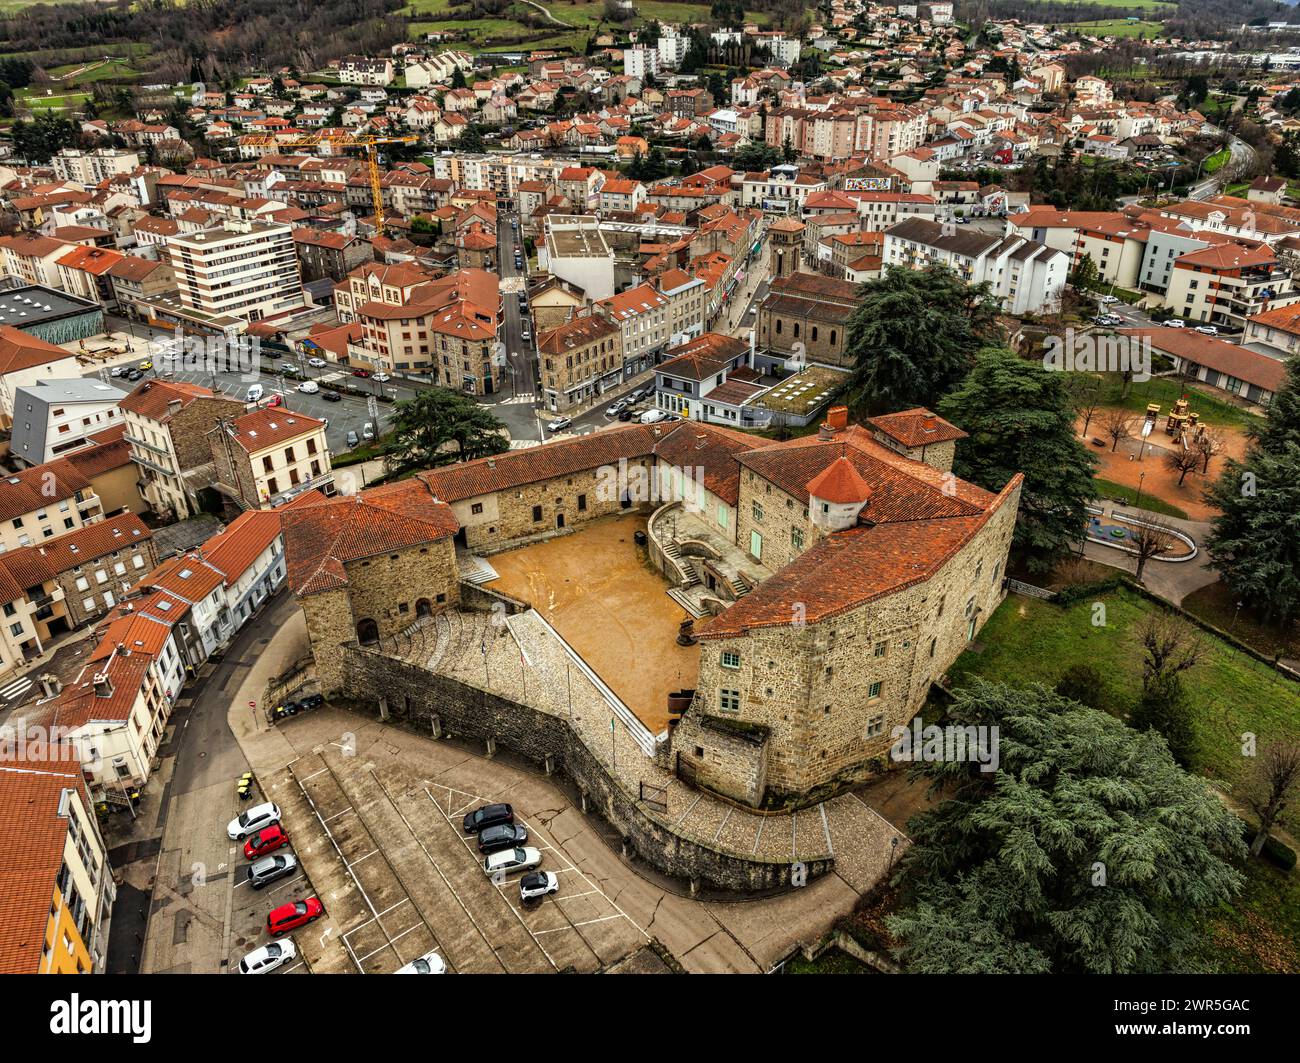 aerial view of the towers and ramparts of the medieval castle of Roche la Molière, In the background the modern city of Roche la Molière. France Stock Photo